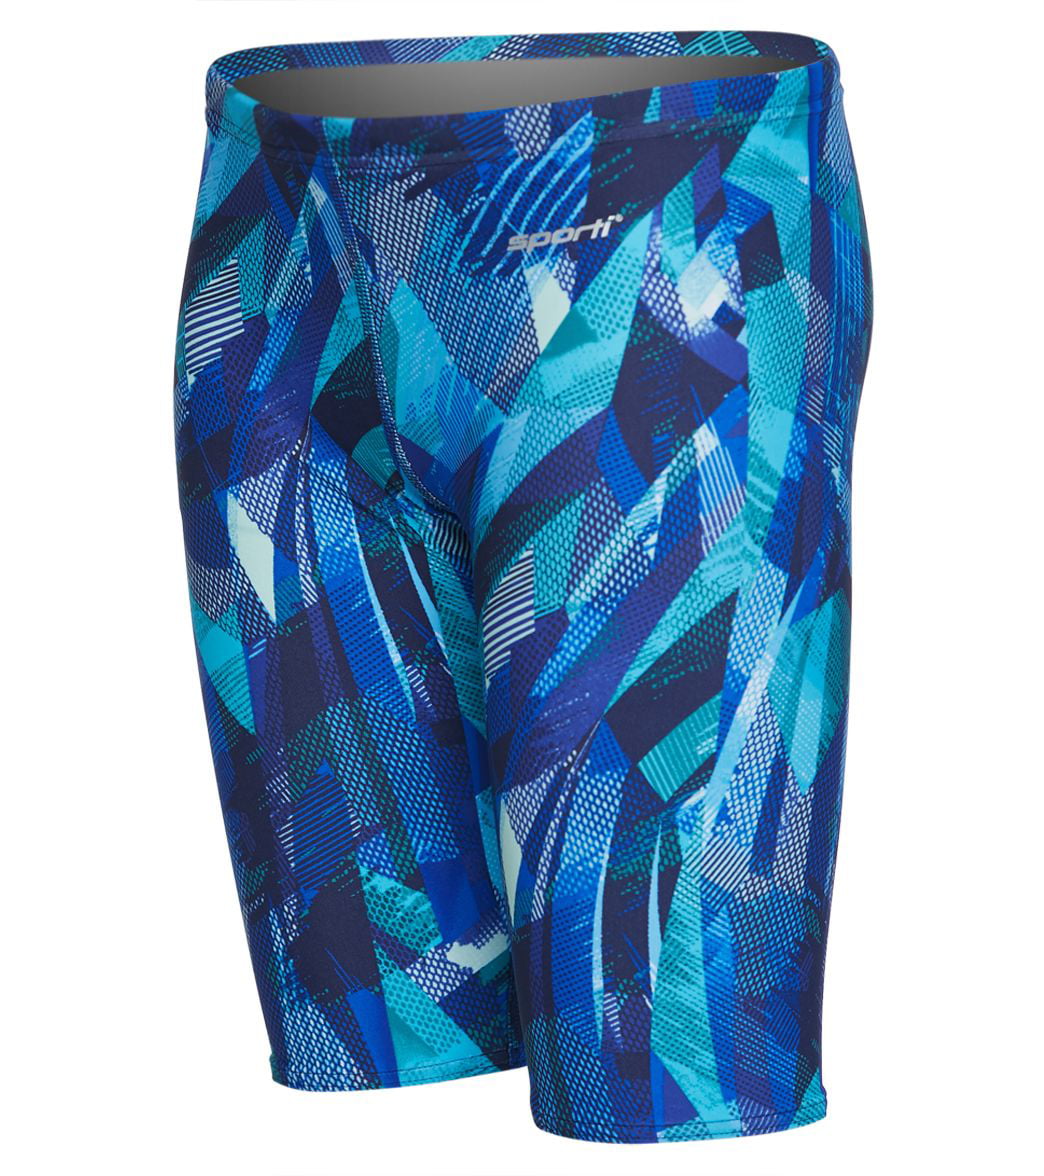 Sporti Catalyst Jammer Swimsuit Youth 22-28 (26Y, Blue) - Walmart.com